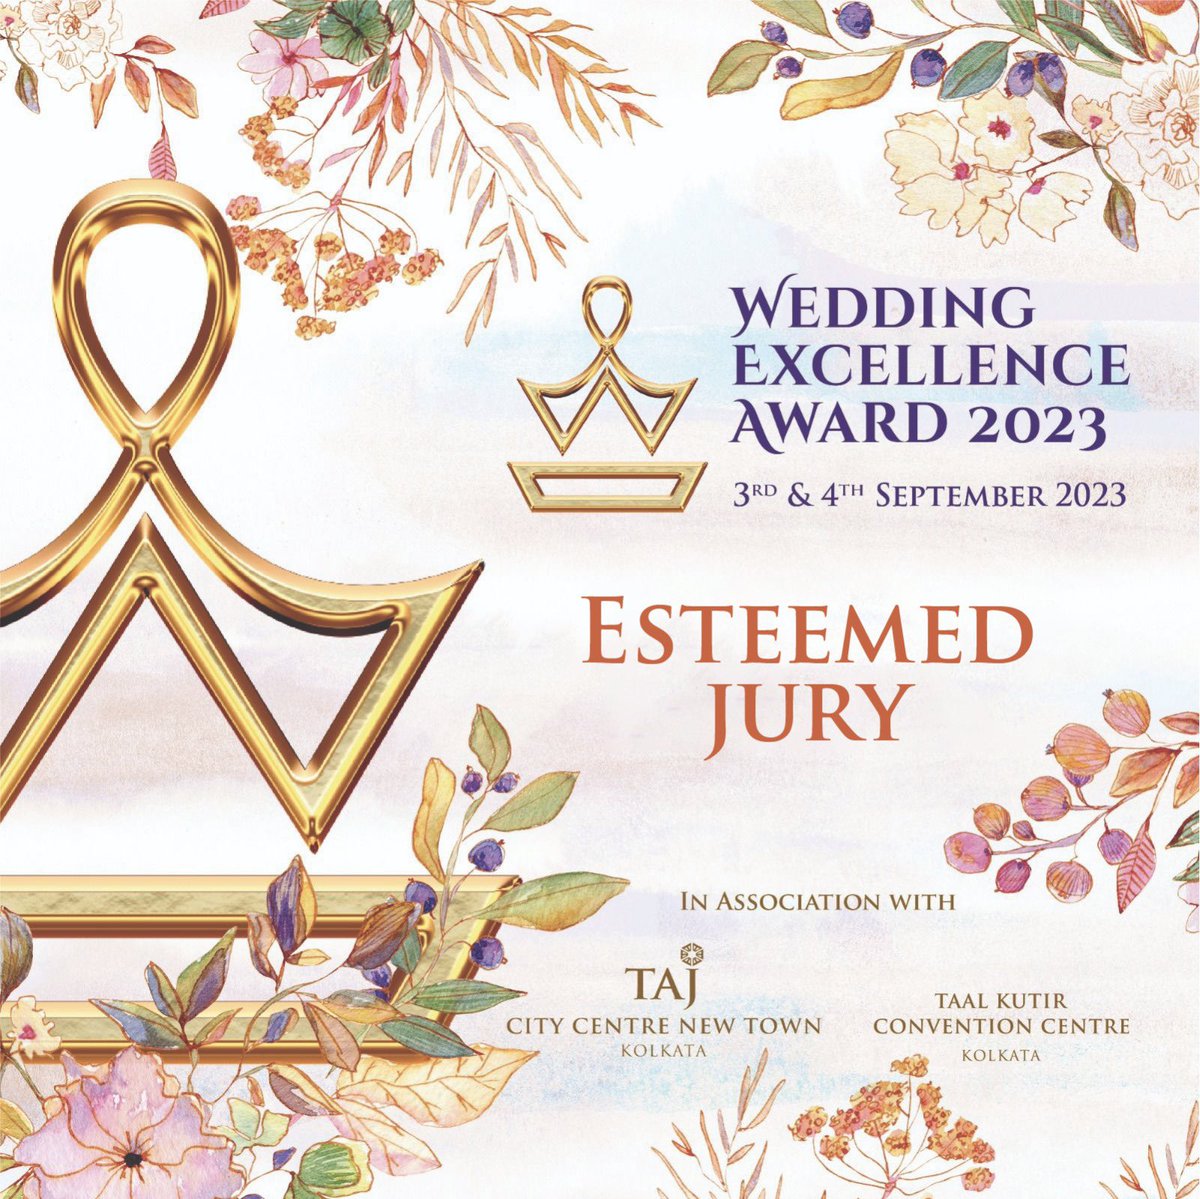 The Decision lies in their hand✨✨
Be ready as we introduce our esteemed panel of Jury who will be deciding our WEA 2023 winners.

#weddingexcellence #weddingawards #wea2023 #weddingpostng #weddingphotography #weddingplanner #weddingins